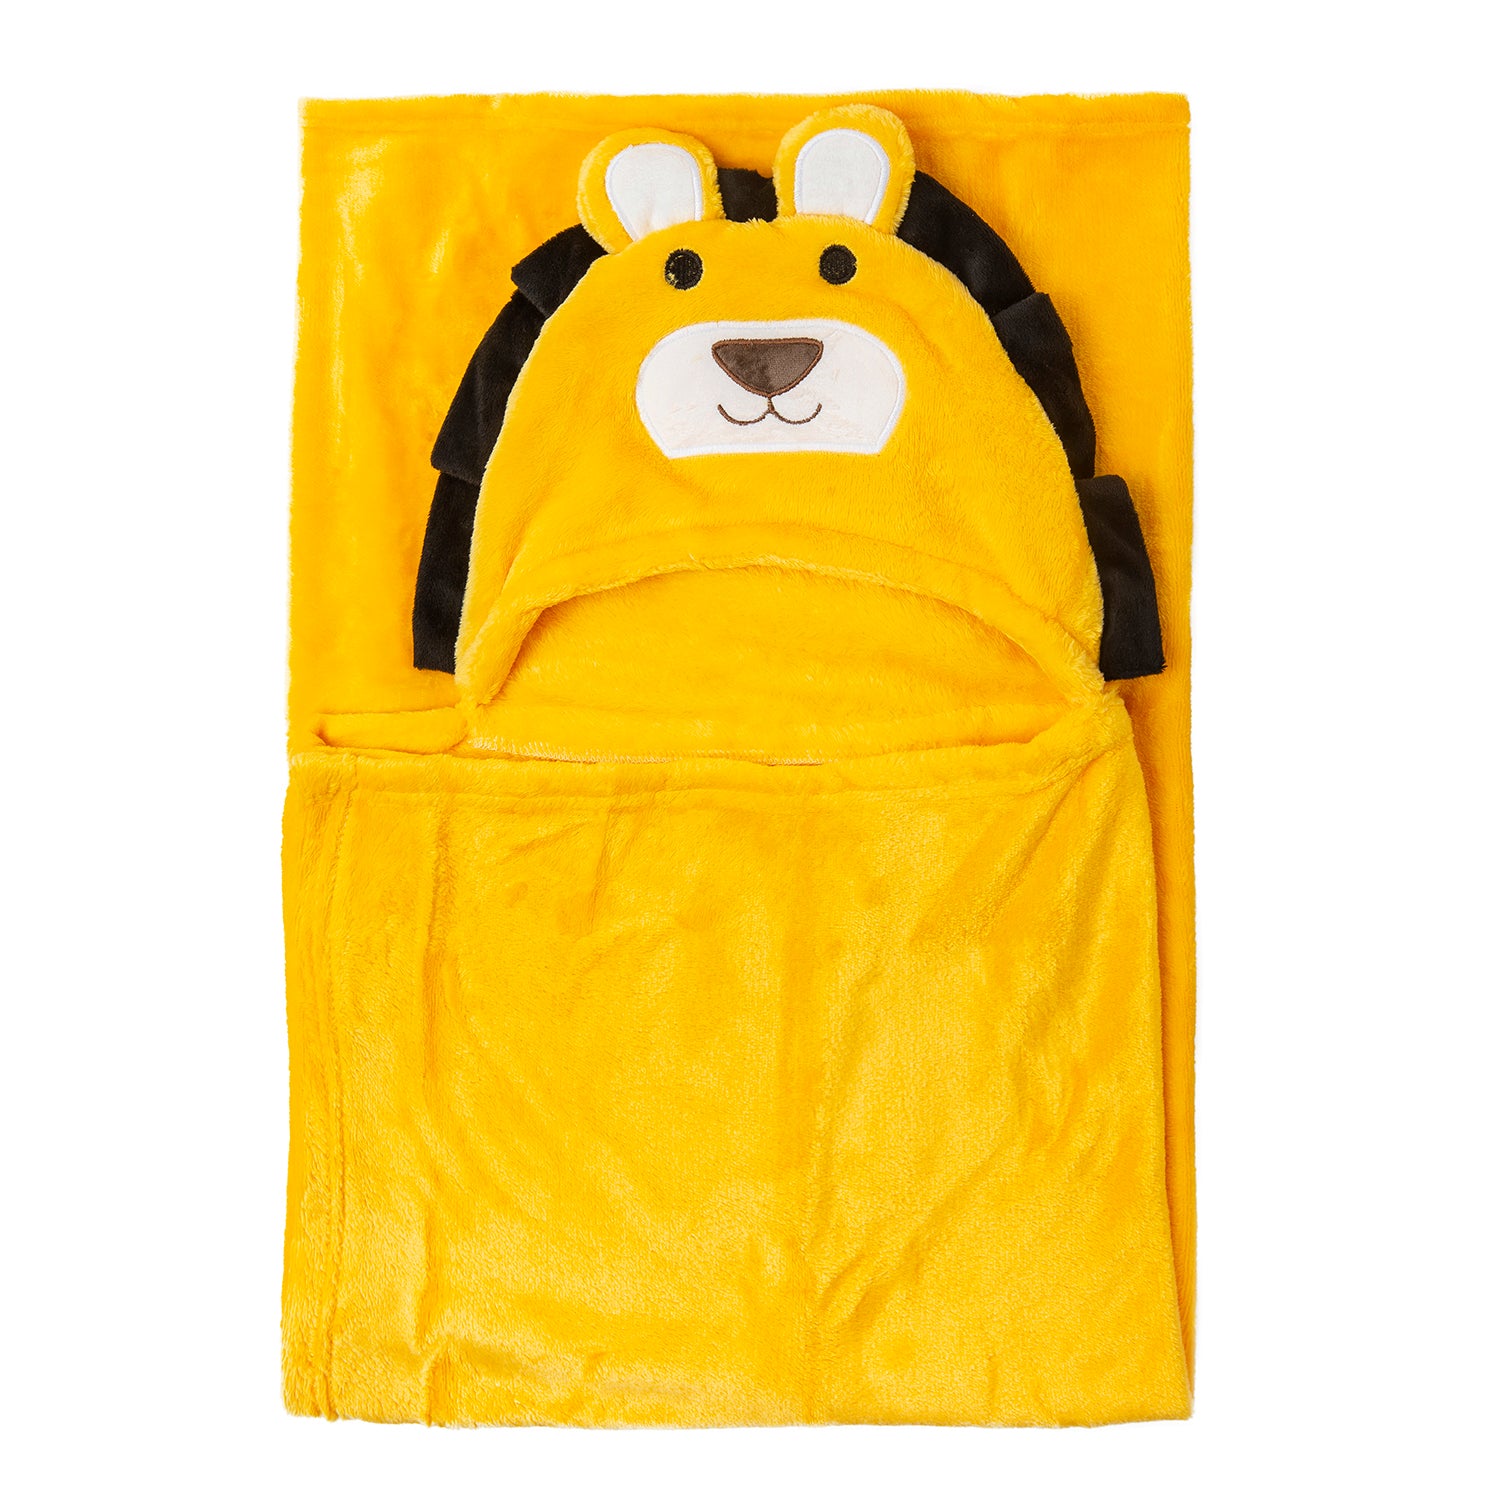 Baby Moo Lion Soft Cozy Hooded Blanket Yellow